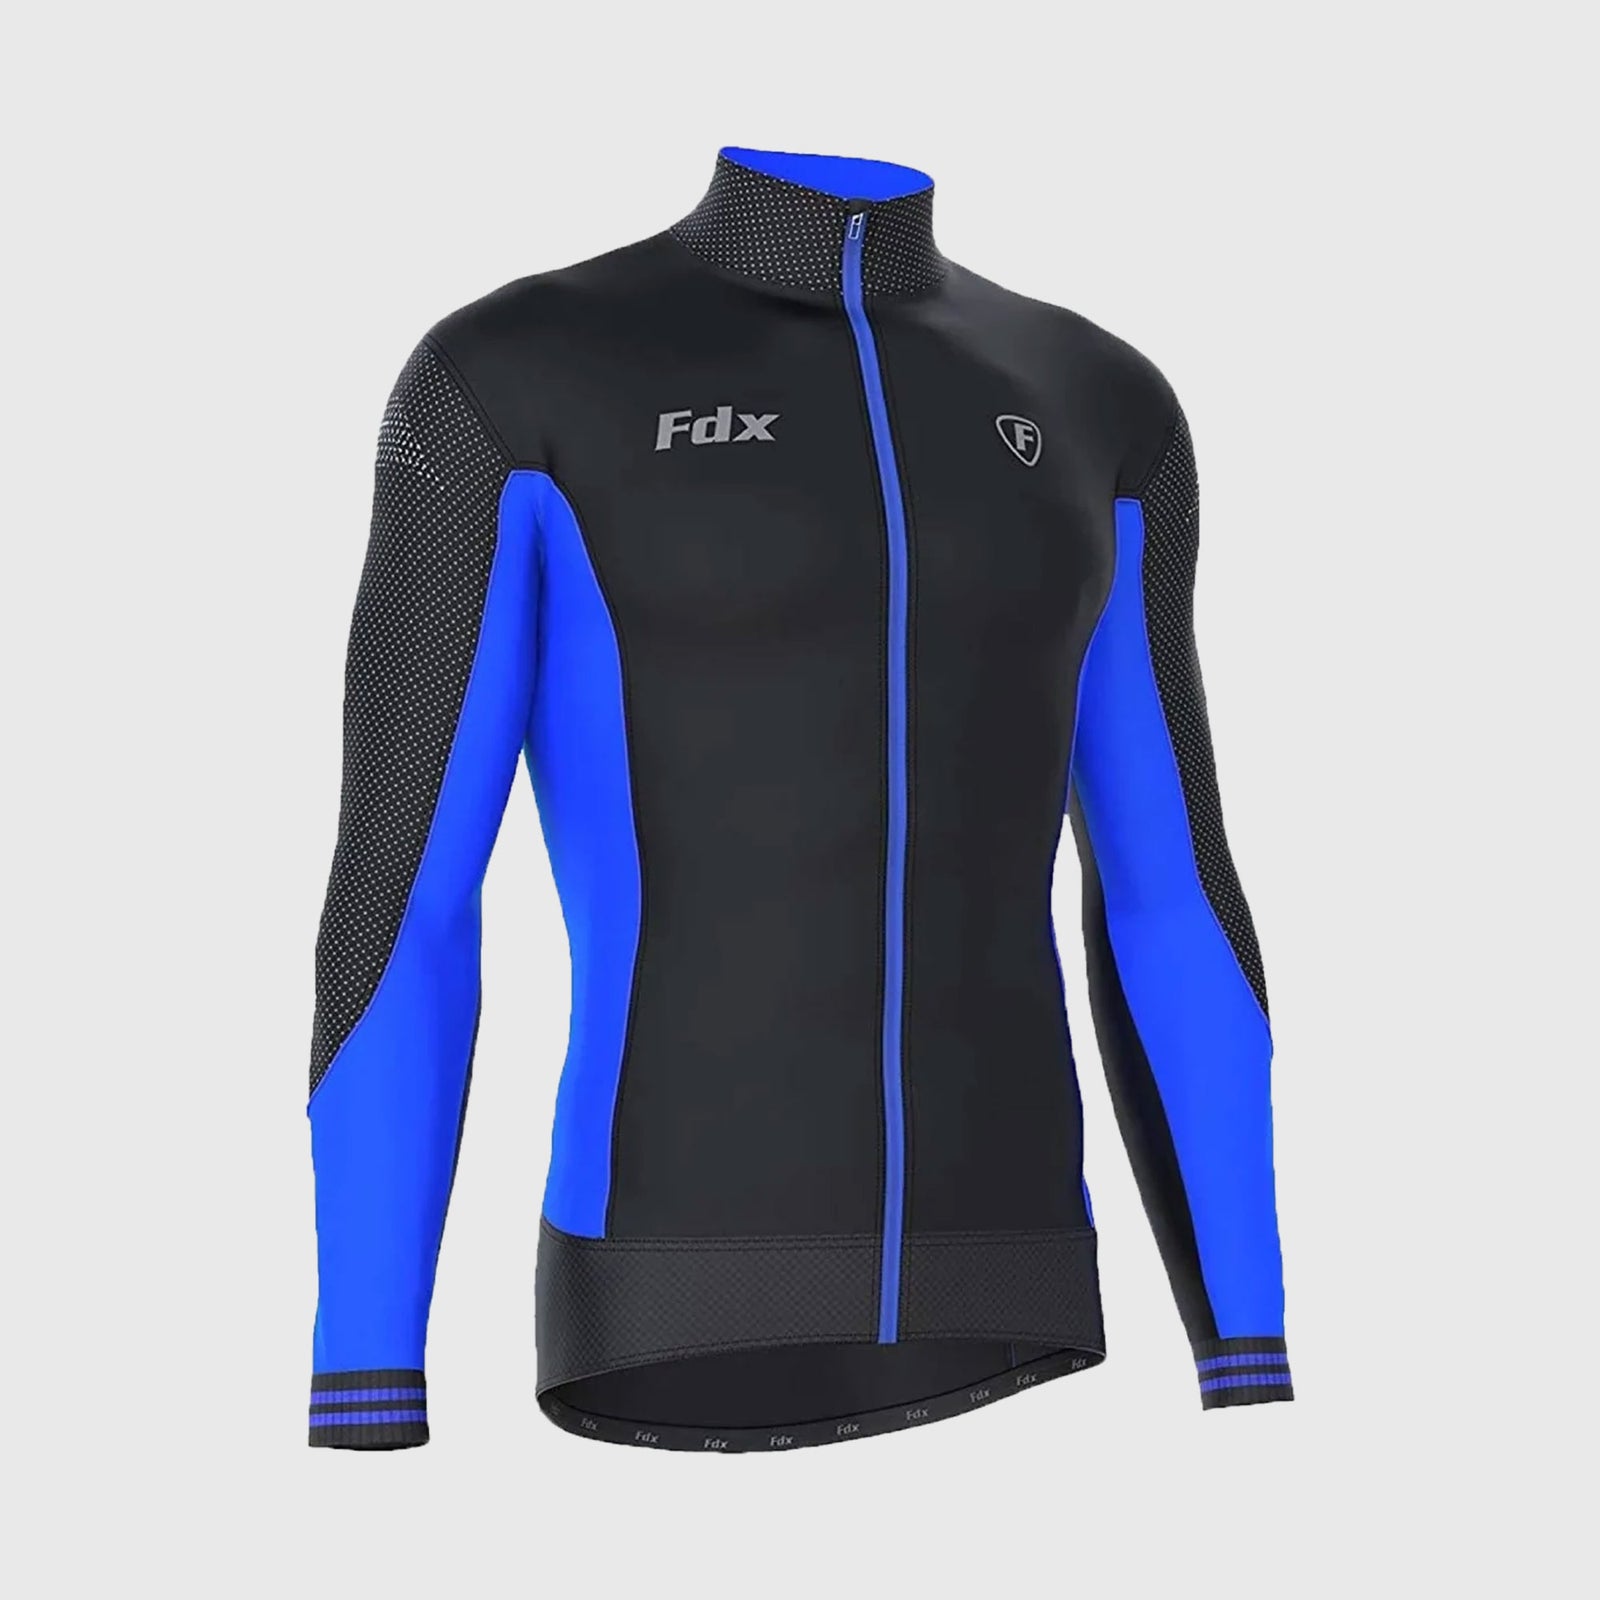  Rayuwen Autumn Winter Cycling Jersey Outdoor Thermal Fleece Bicycle  Tights Full Zipper Windproof Road Bike Long Sleeve + Bib  Pants,Blue,XS(160CM/53KG) : Everything Else